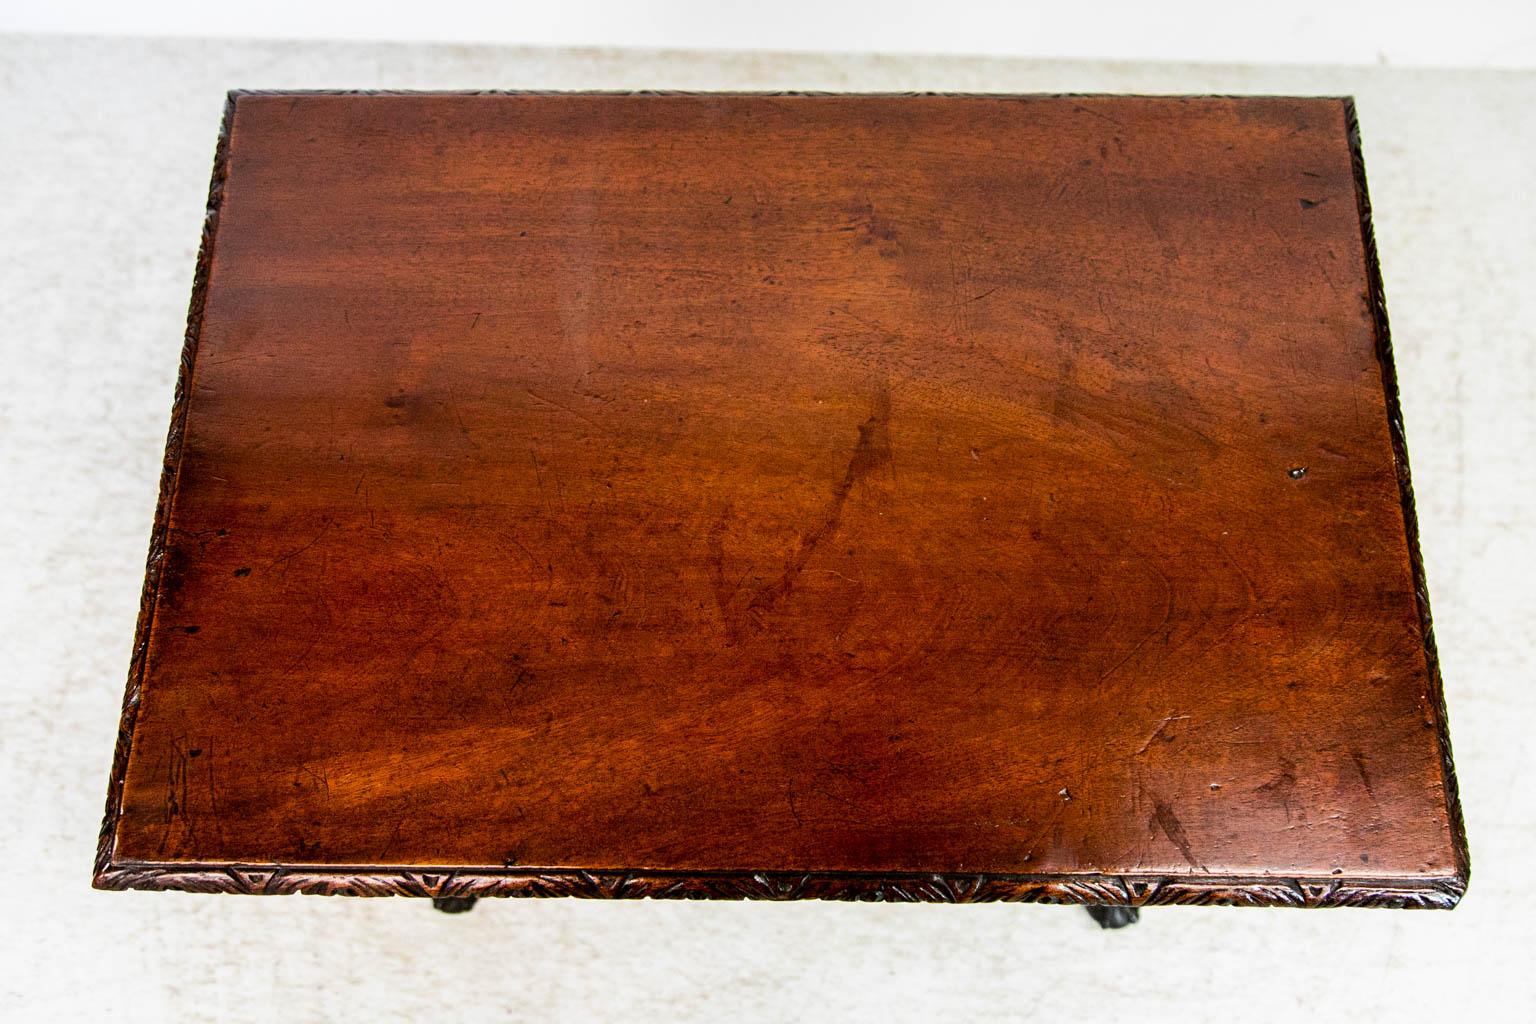 The top of this lowboy has a 19 inch single board with no splits or cracks. It has carved edge molding on all four sides. The drawer fronts are carved with floral and leaf designs on a stipled background. There is a repair at the top of the right